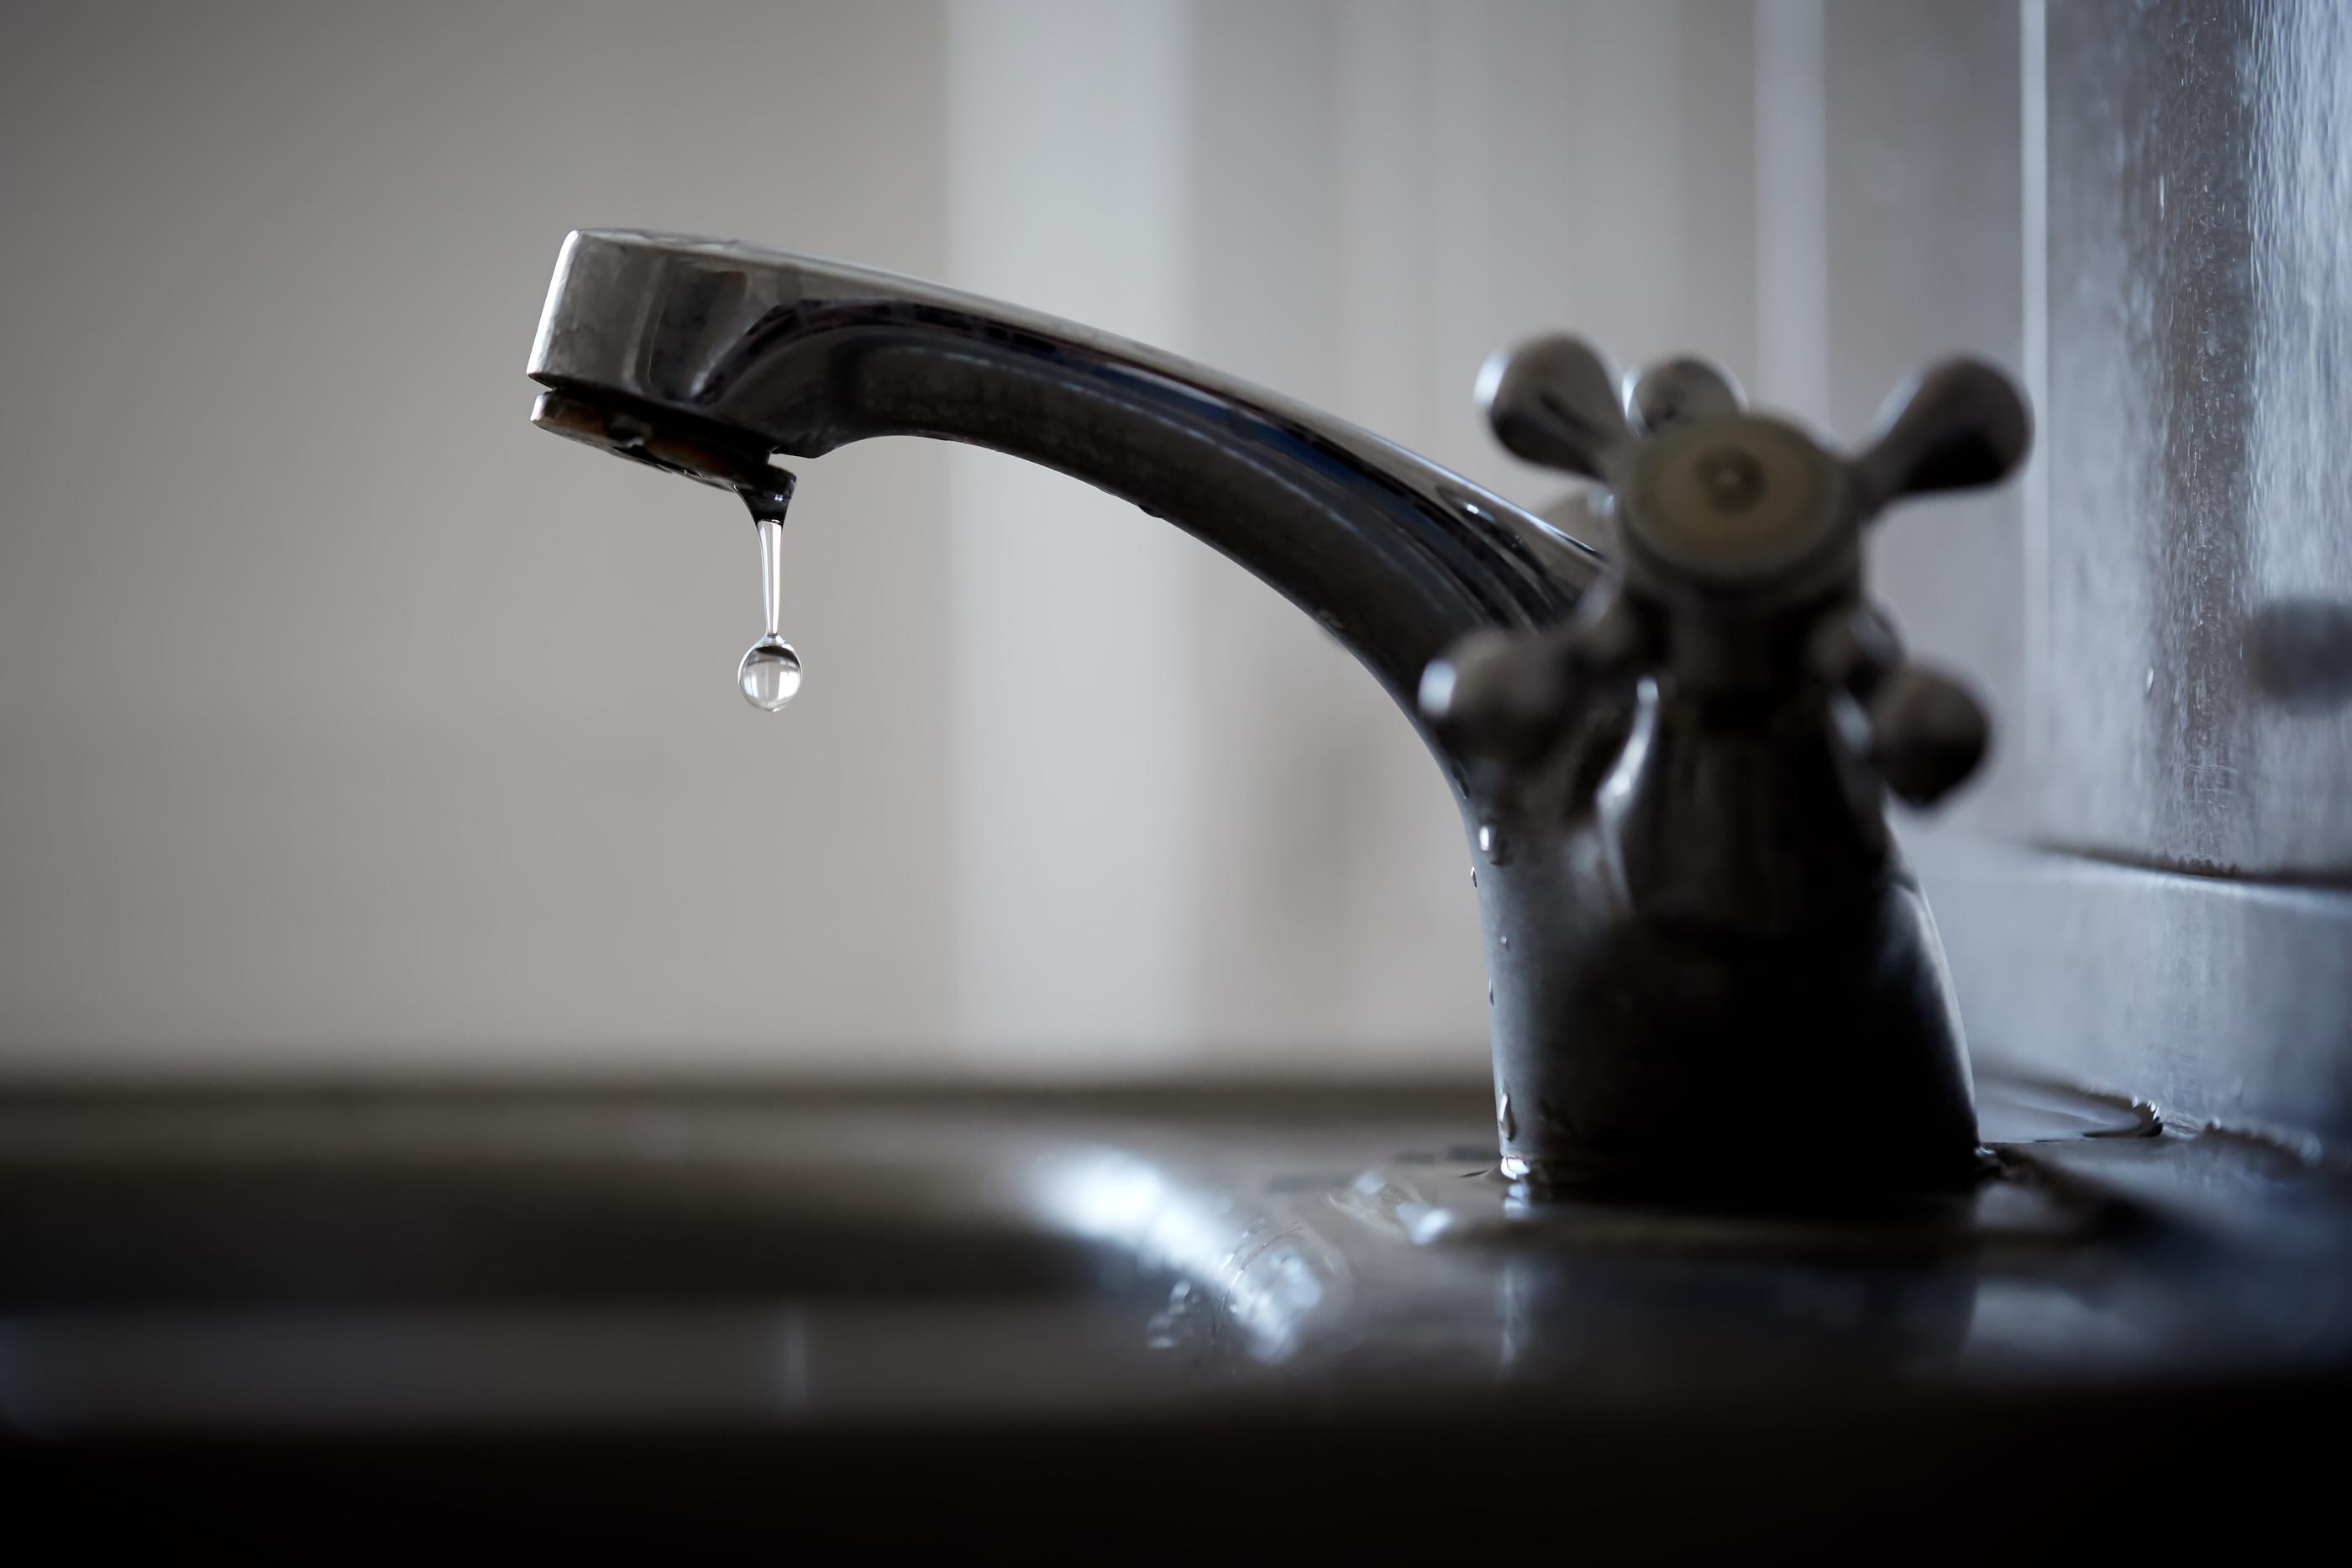 Fix A Leaky Compression Faucet in 6 Simple Steps